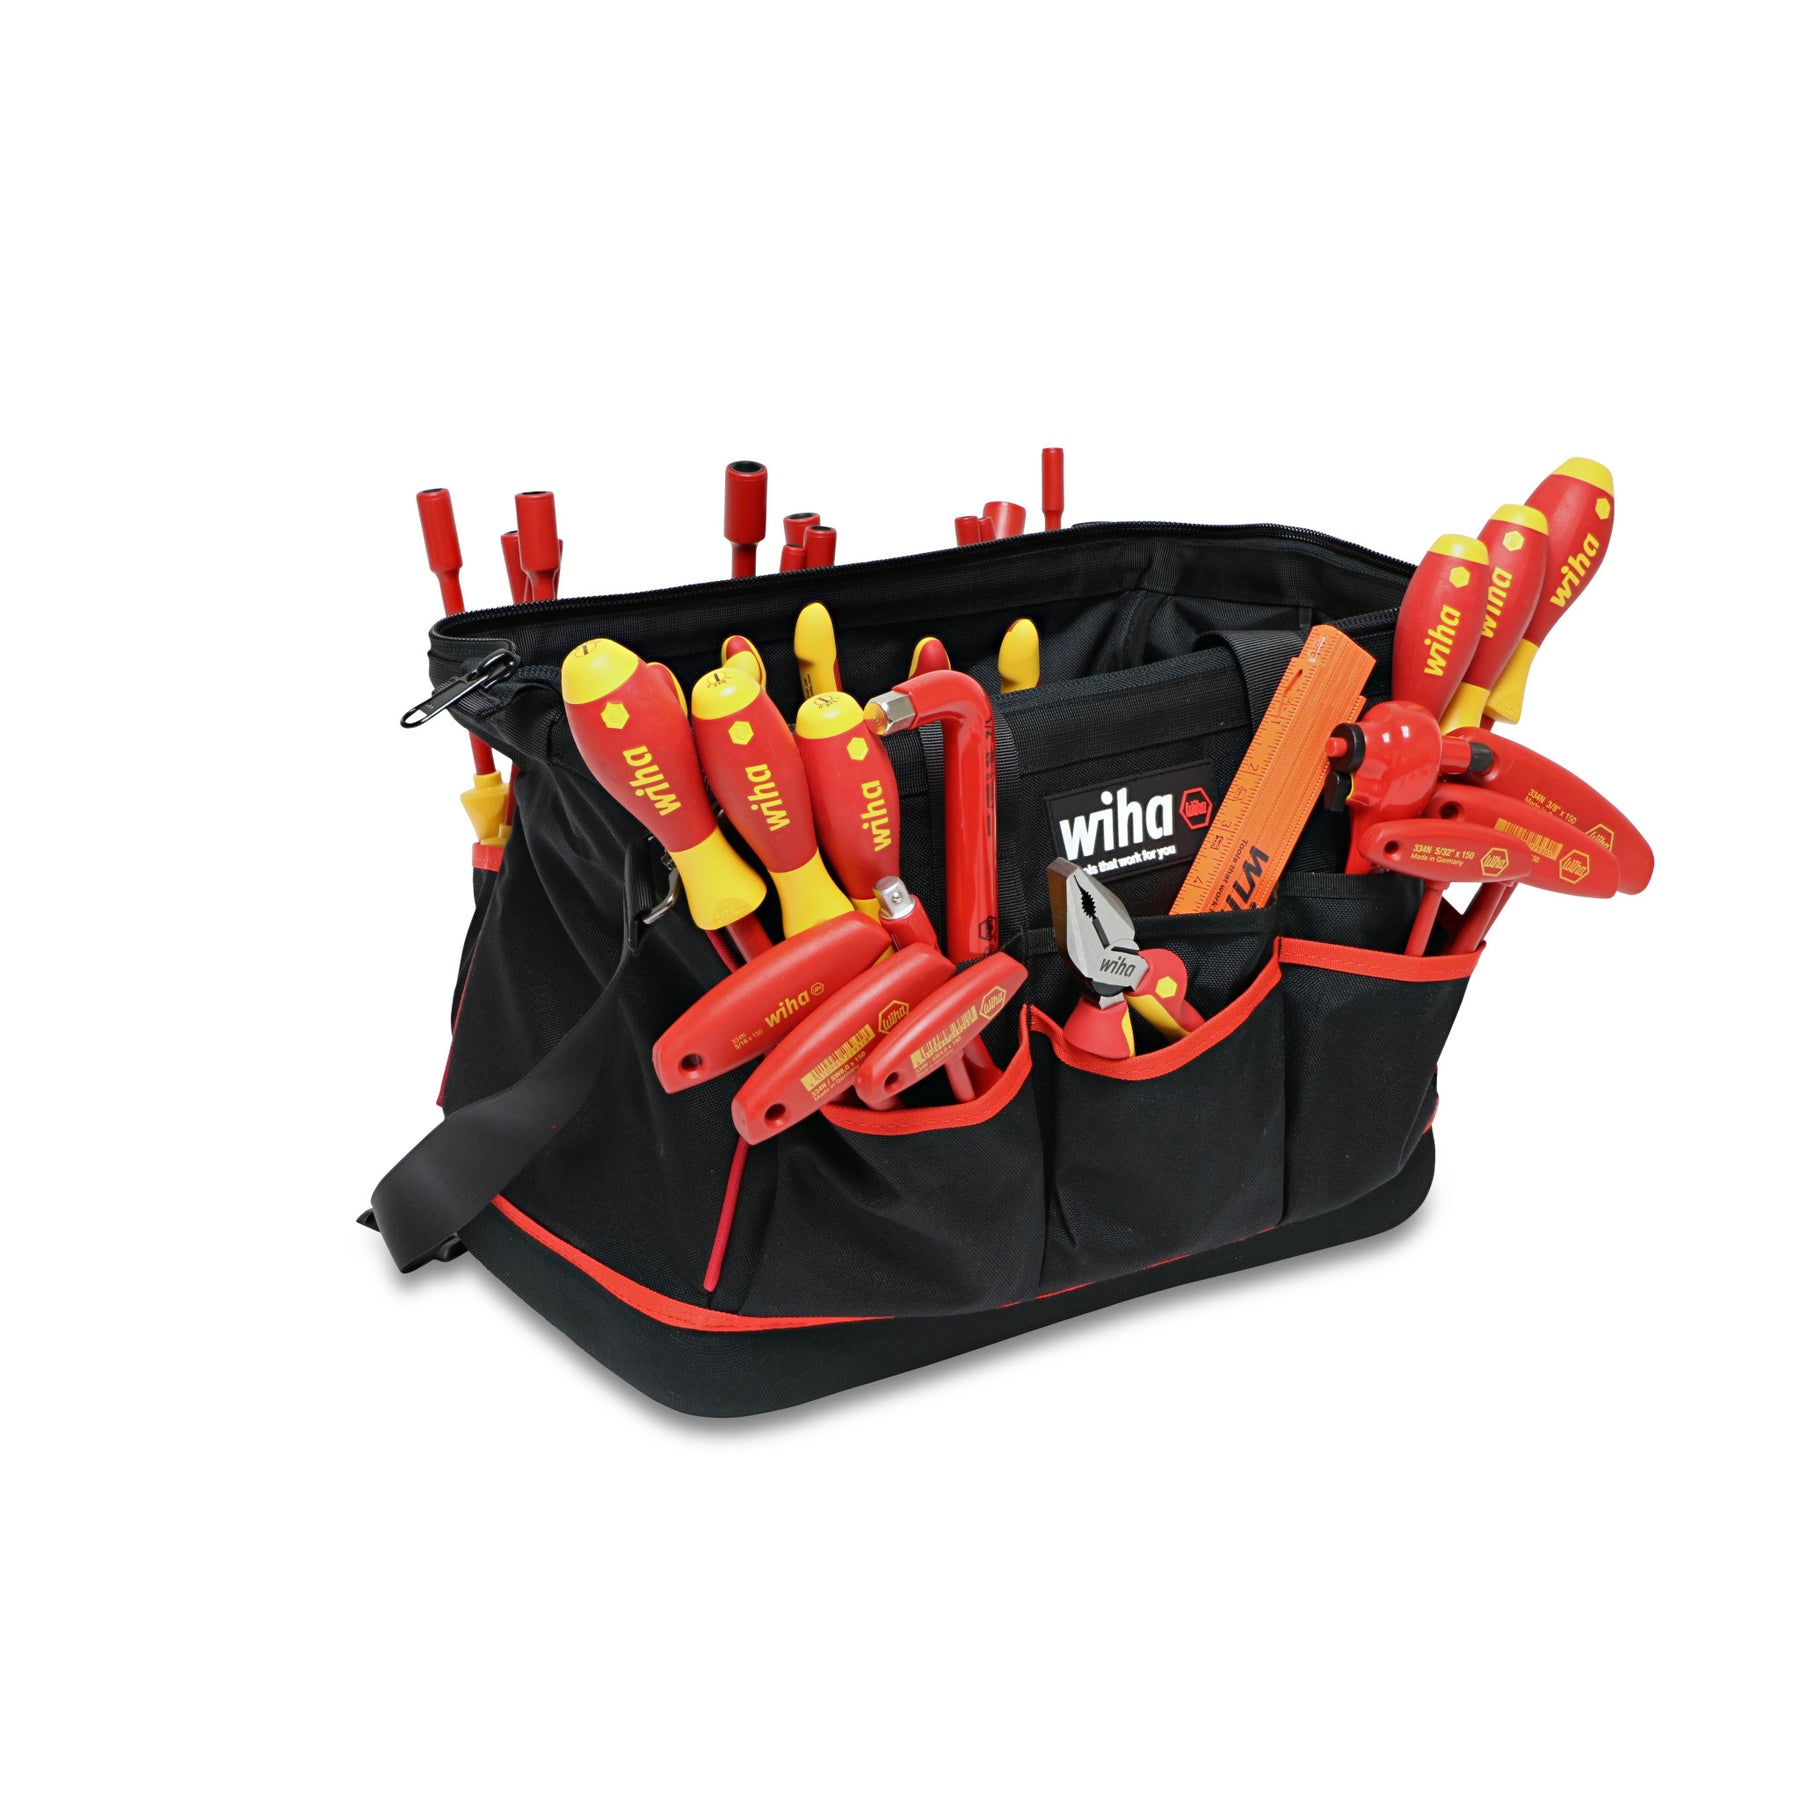 Wiha 32877 Insulated Pliers/Cutters & Drivers Set